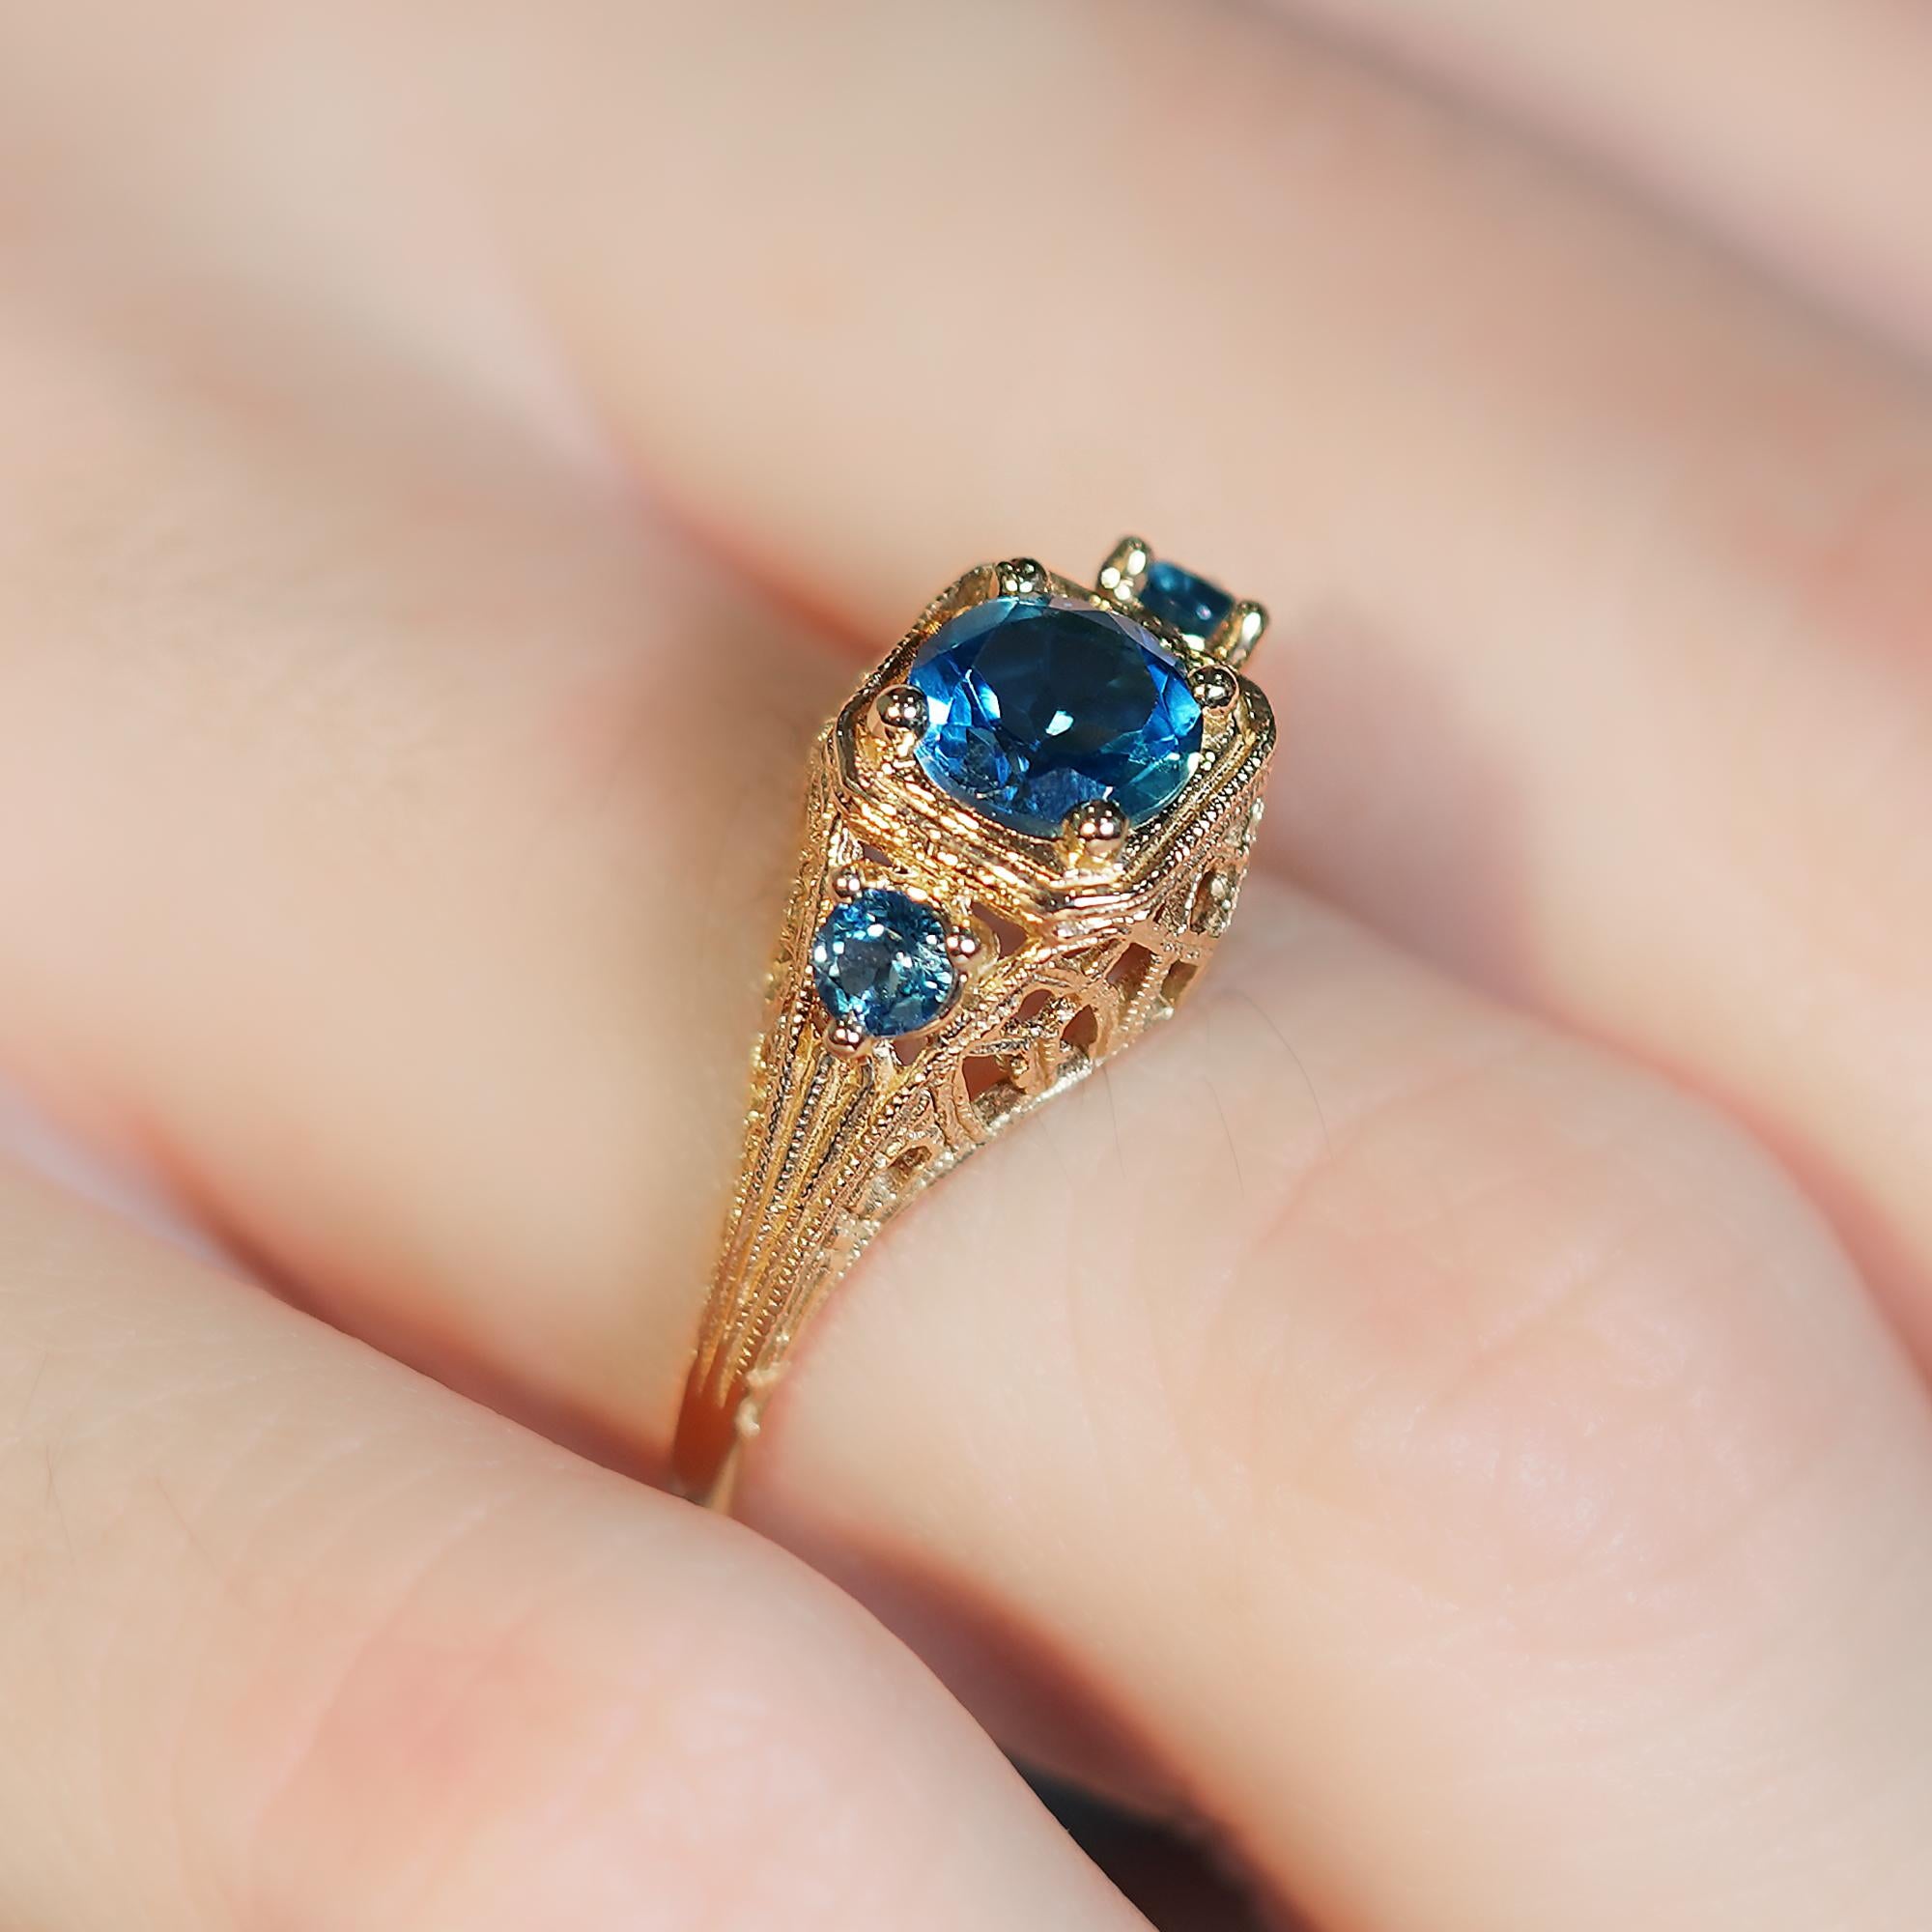 For Sale:  Natural London Blue Topaz Vintage Style Filigree Three Stone Ring in 9K Gold 8